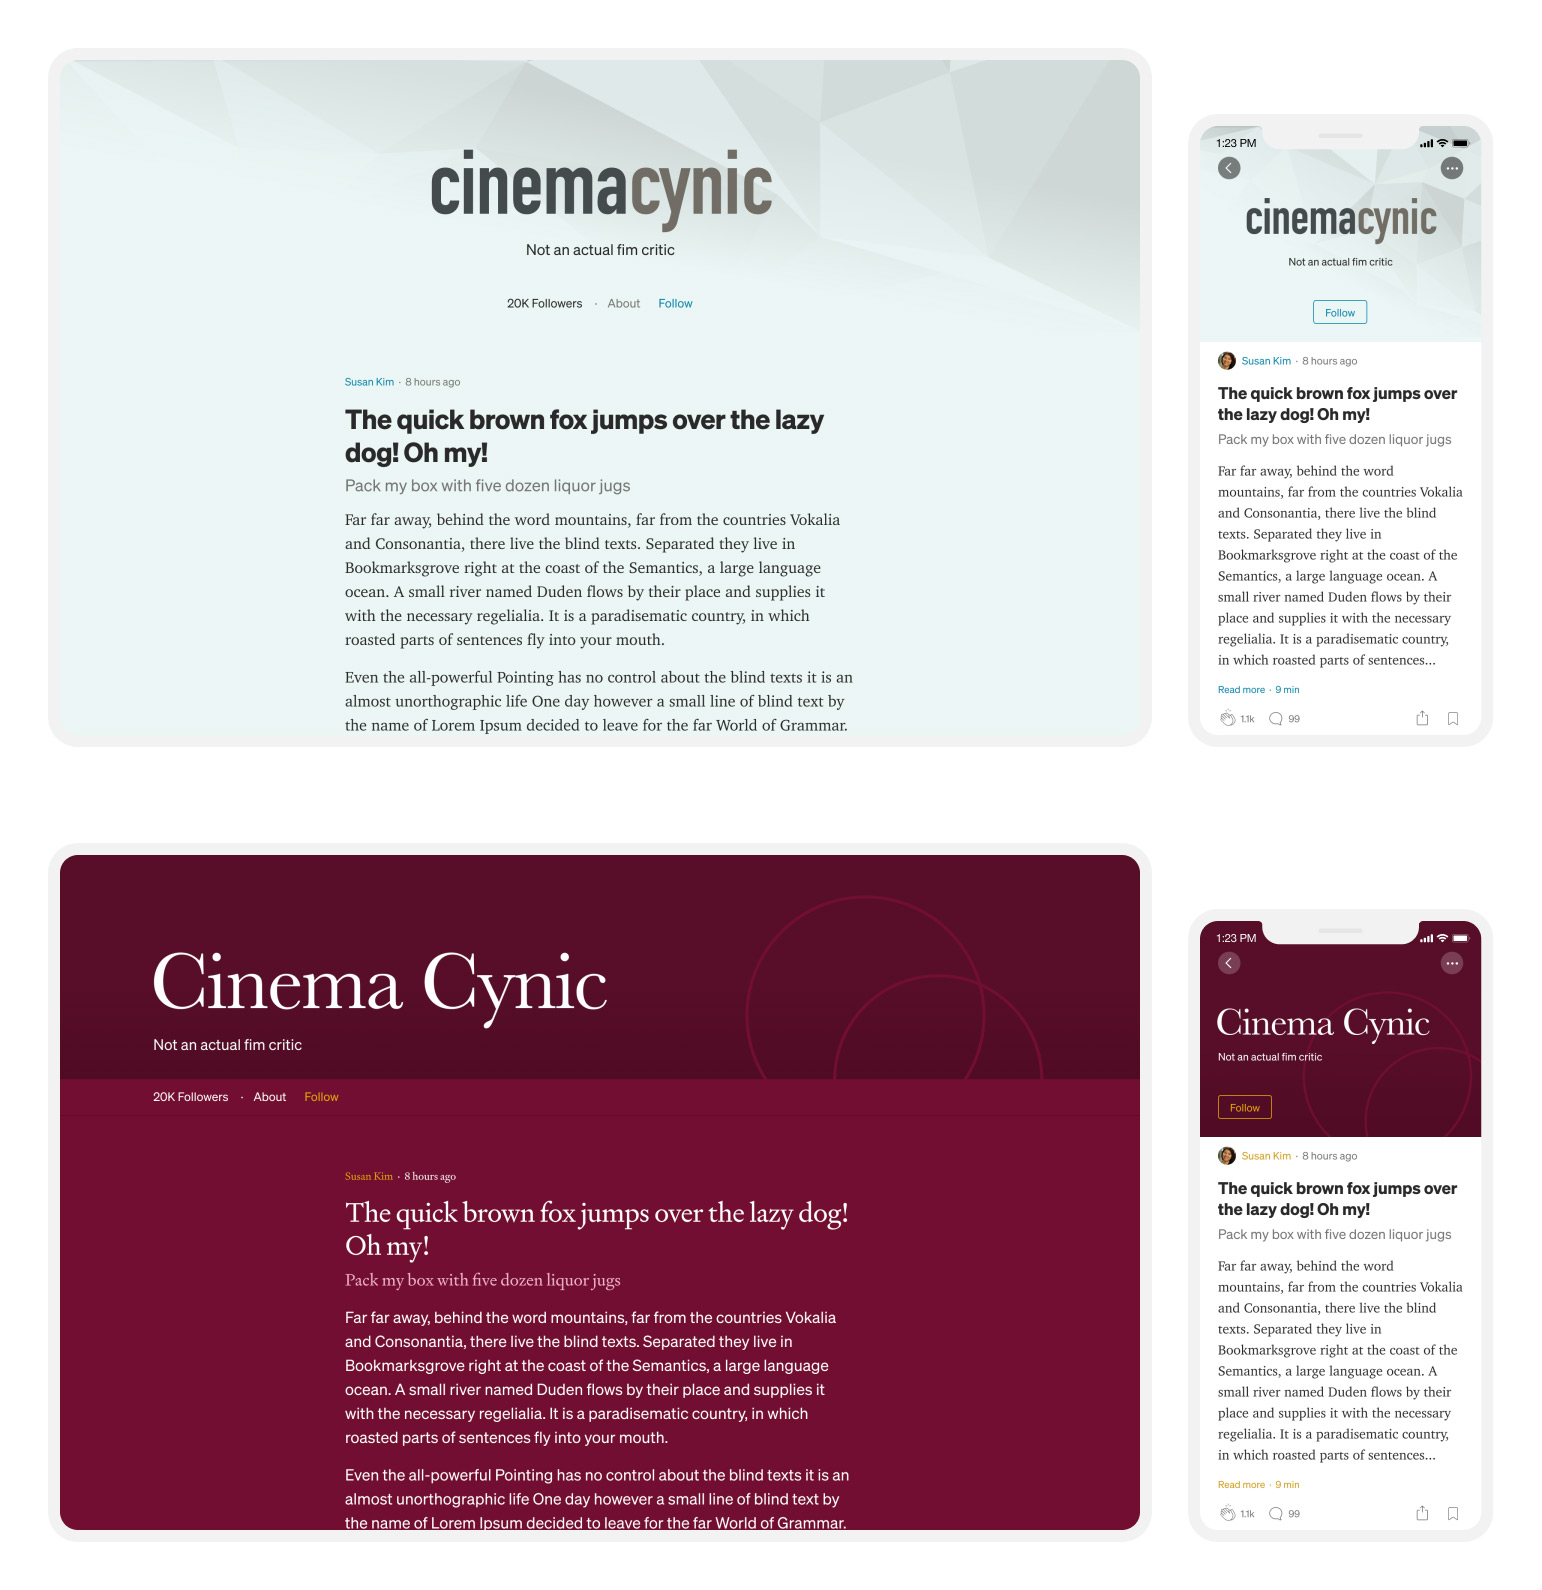 An example of different themes being applied to the same publication to convey a sense of brand, place, and context. The app's official first version would show essential parts of the customization, with a more complete implementation to follow.